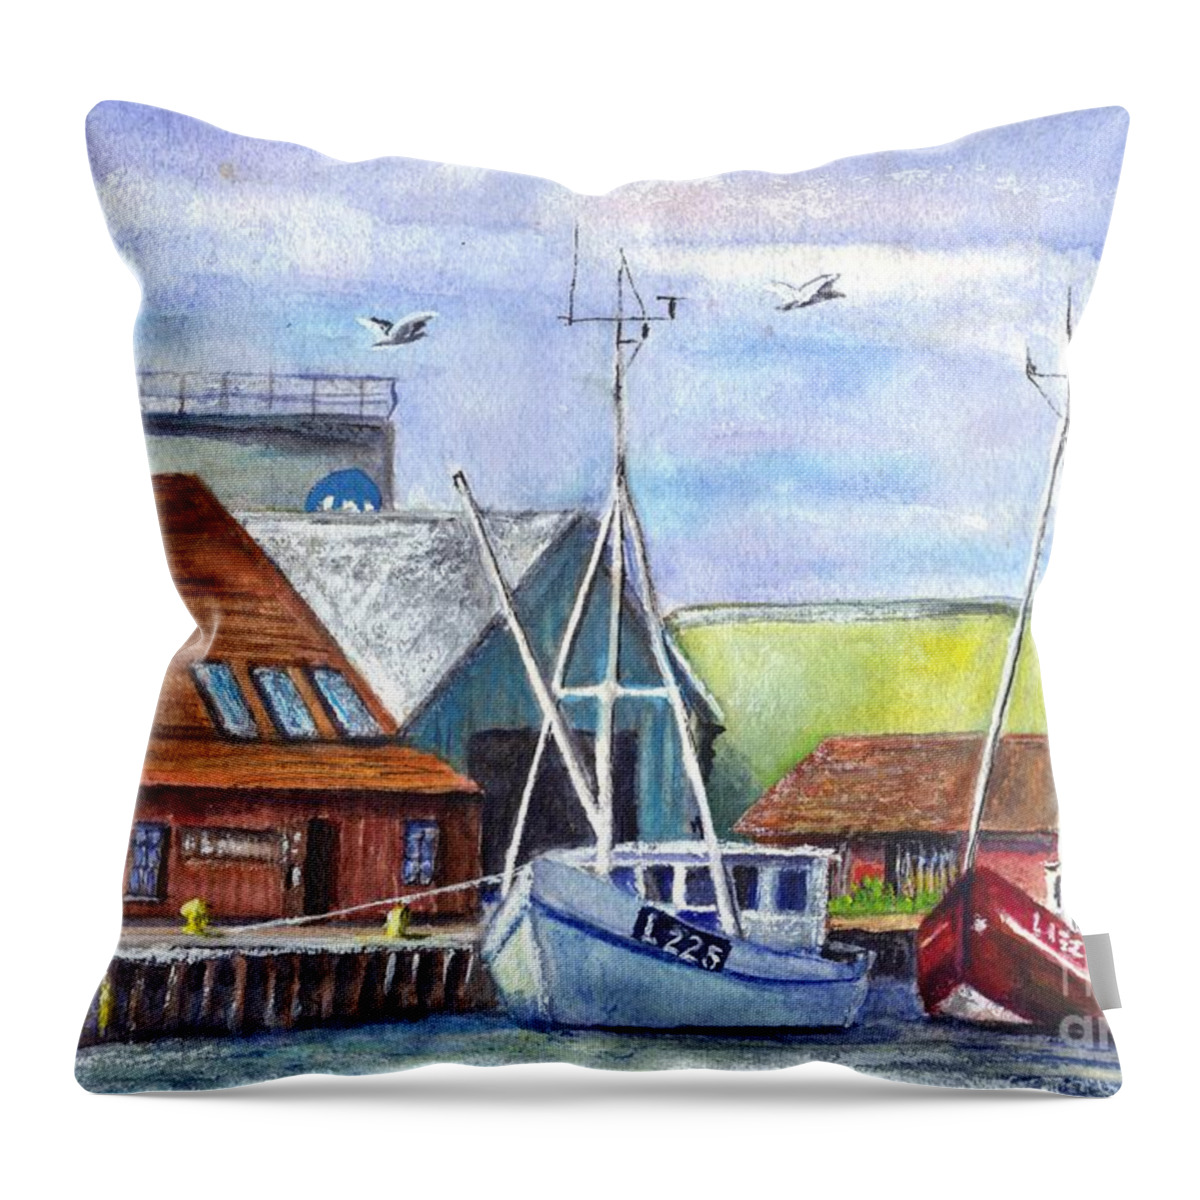 Harbour Throw Pillow featuring the painting Tyboron Harbour in Denmark by Carol Wisniewski